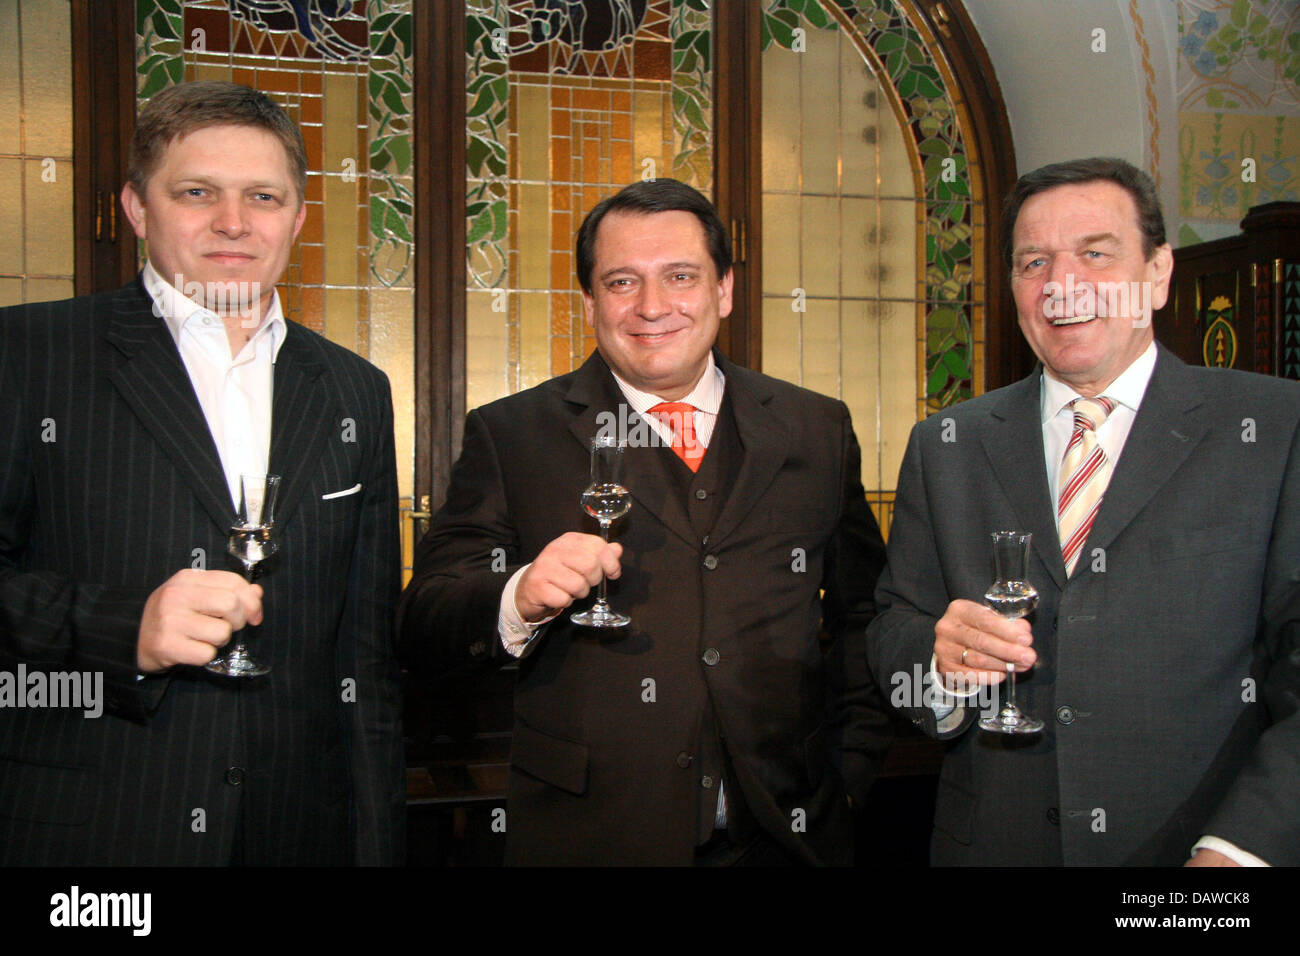 Slovakia's Premier Robert Fico, Czech opposition leader Jiri Paroubek and former German chancellor Gerhard Schroeder (L-R) pose at Obecni Dum, Prague, Czech Republic, 23 January 2007. During a talk at a restaurant in the historic Old Town the three Social Democrats discussed, among other things, the future structuring of Europe. Brief mention was also of current negotiations betwee Stock Photo